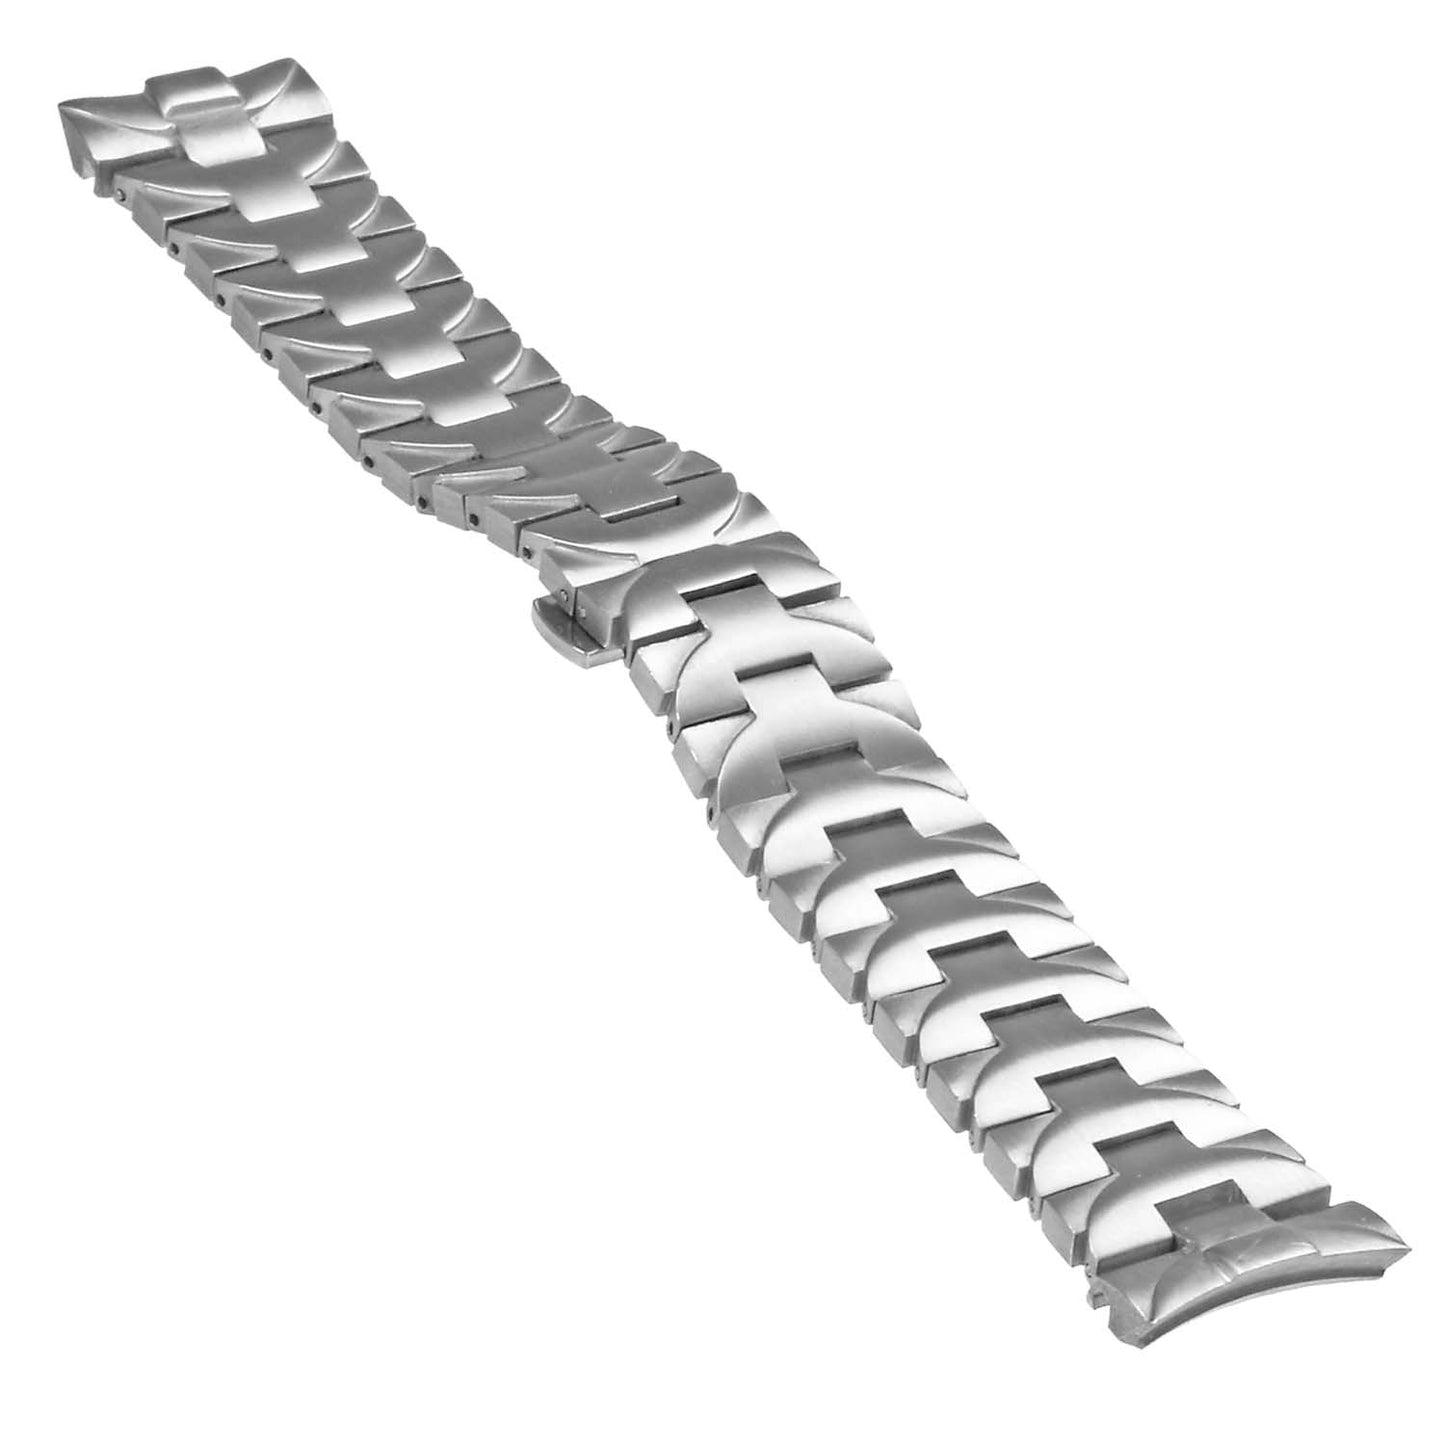 Heavy Duty Stainless Steel Watch Band with Hidden Clasp